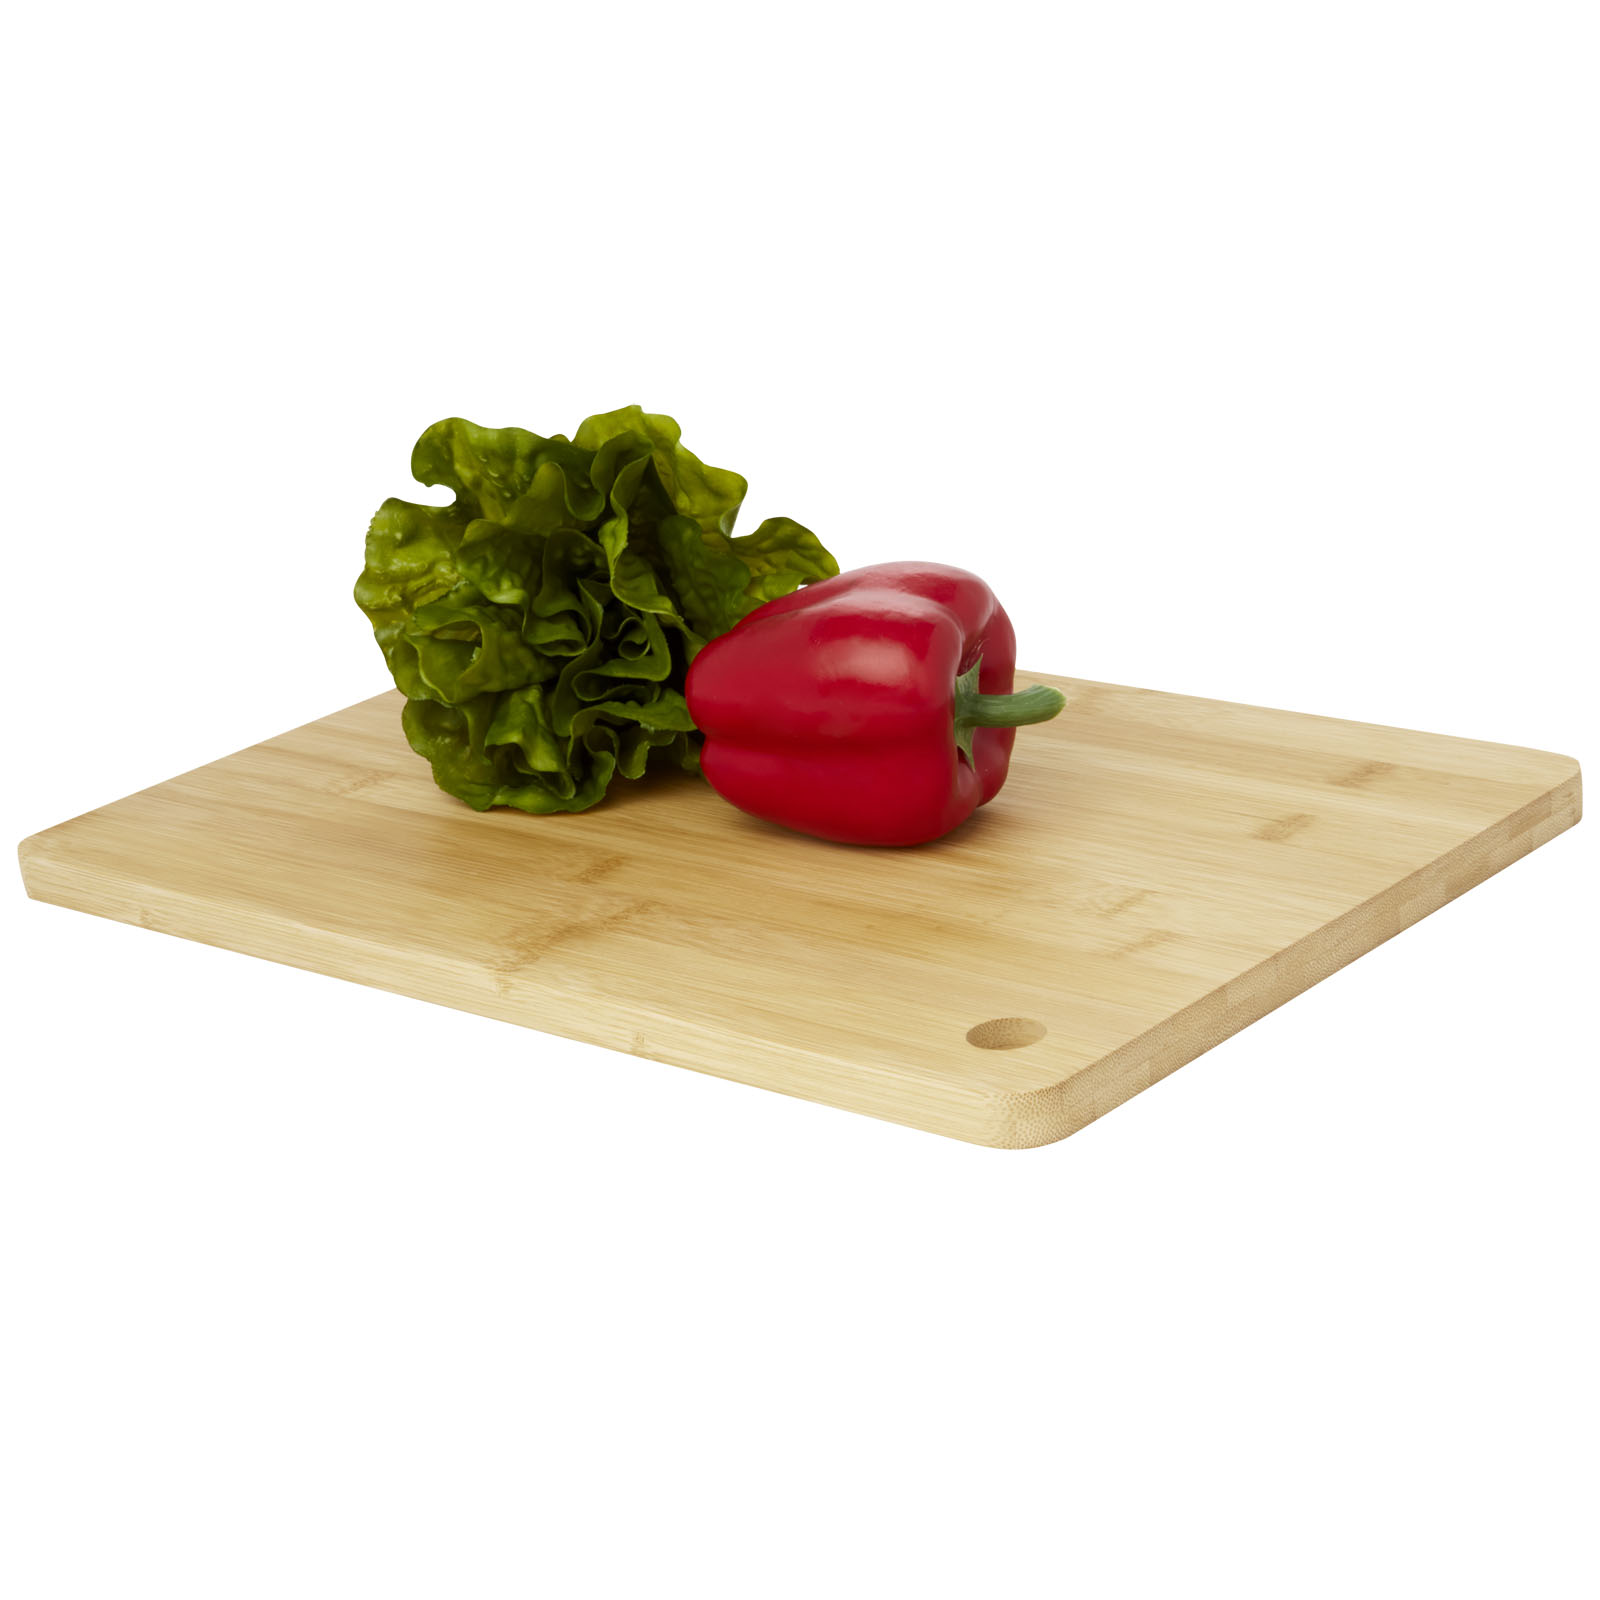 Sustainable Bamboo Cutting and Serving Board - Lyme Regis